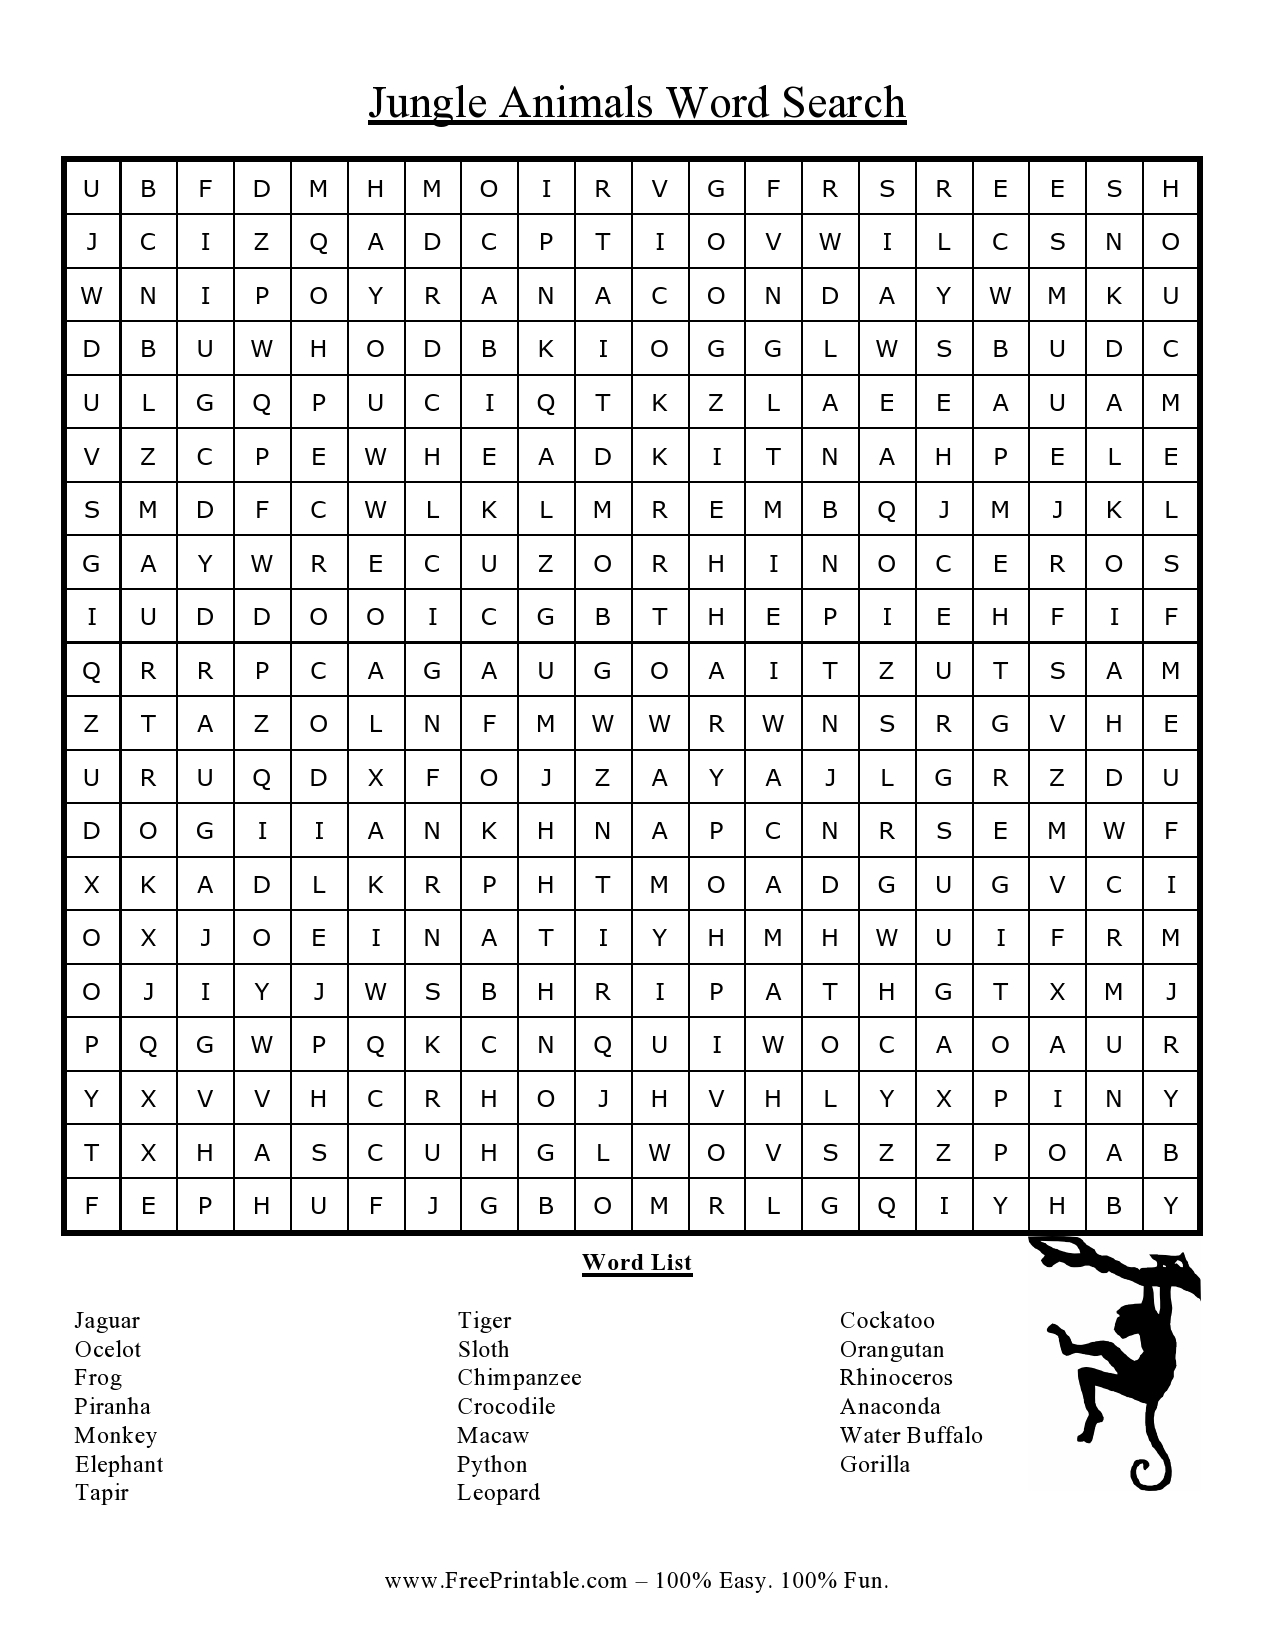 Animal search. Animals Wordsearch Worksheets. Word search animals. African animals Word search готовый. African animals Word search ответы.